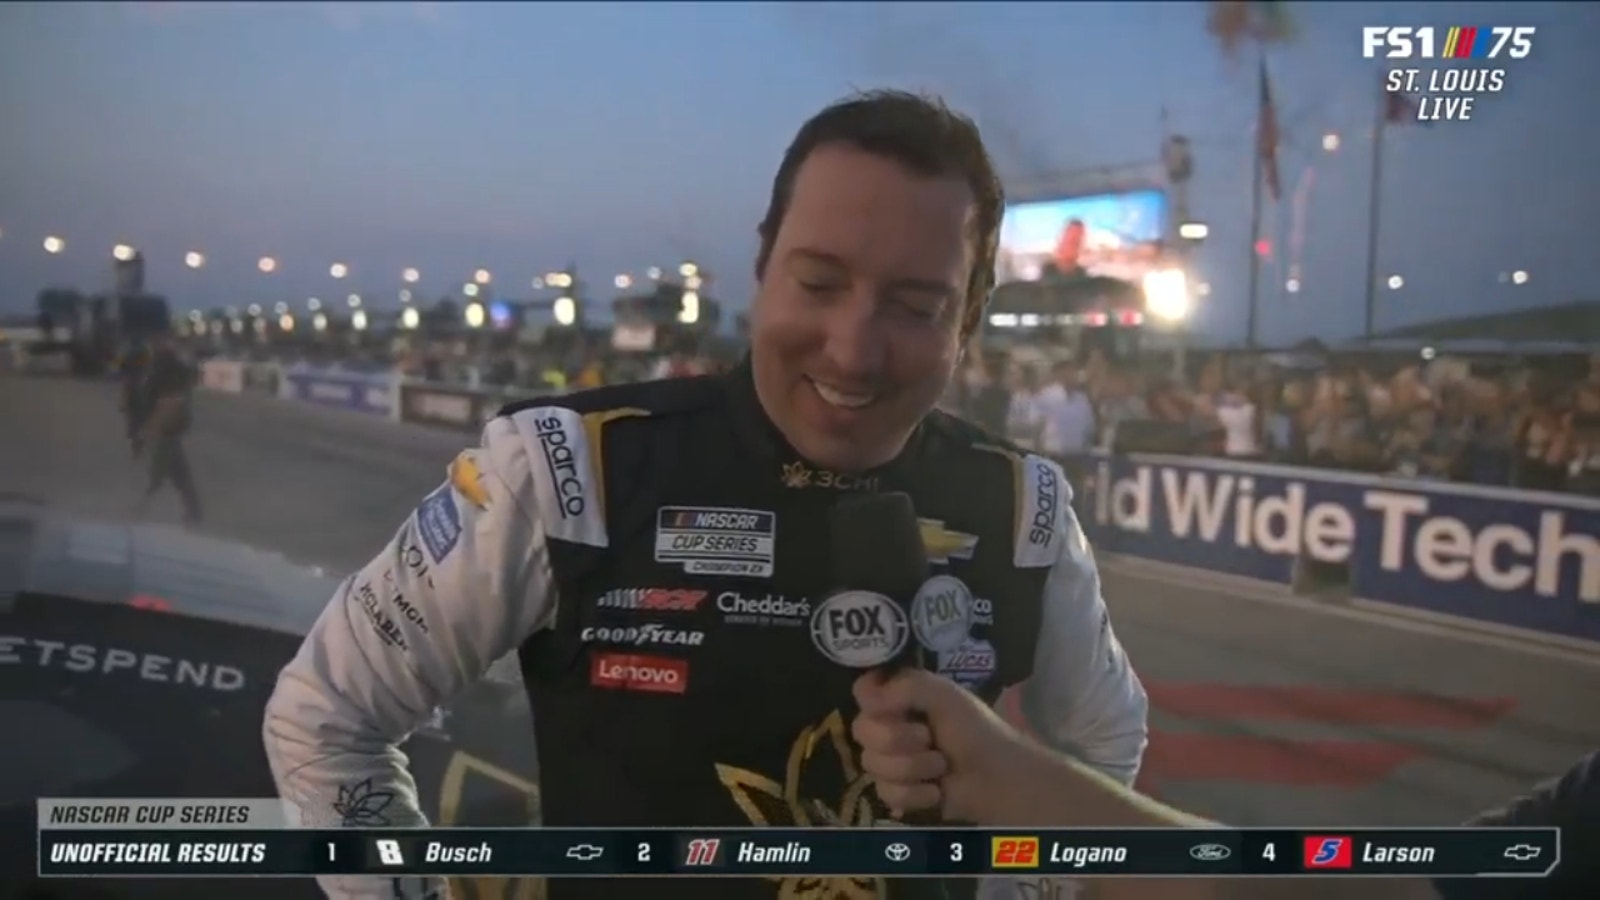 "Great for RCR, just win, baby!"